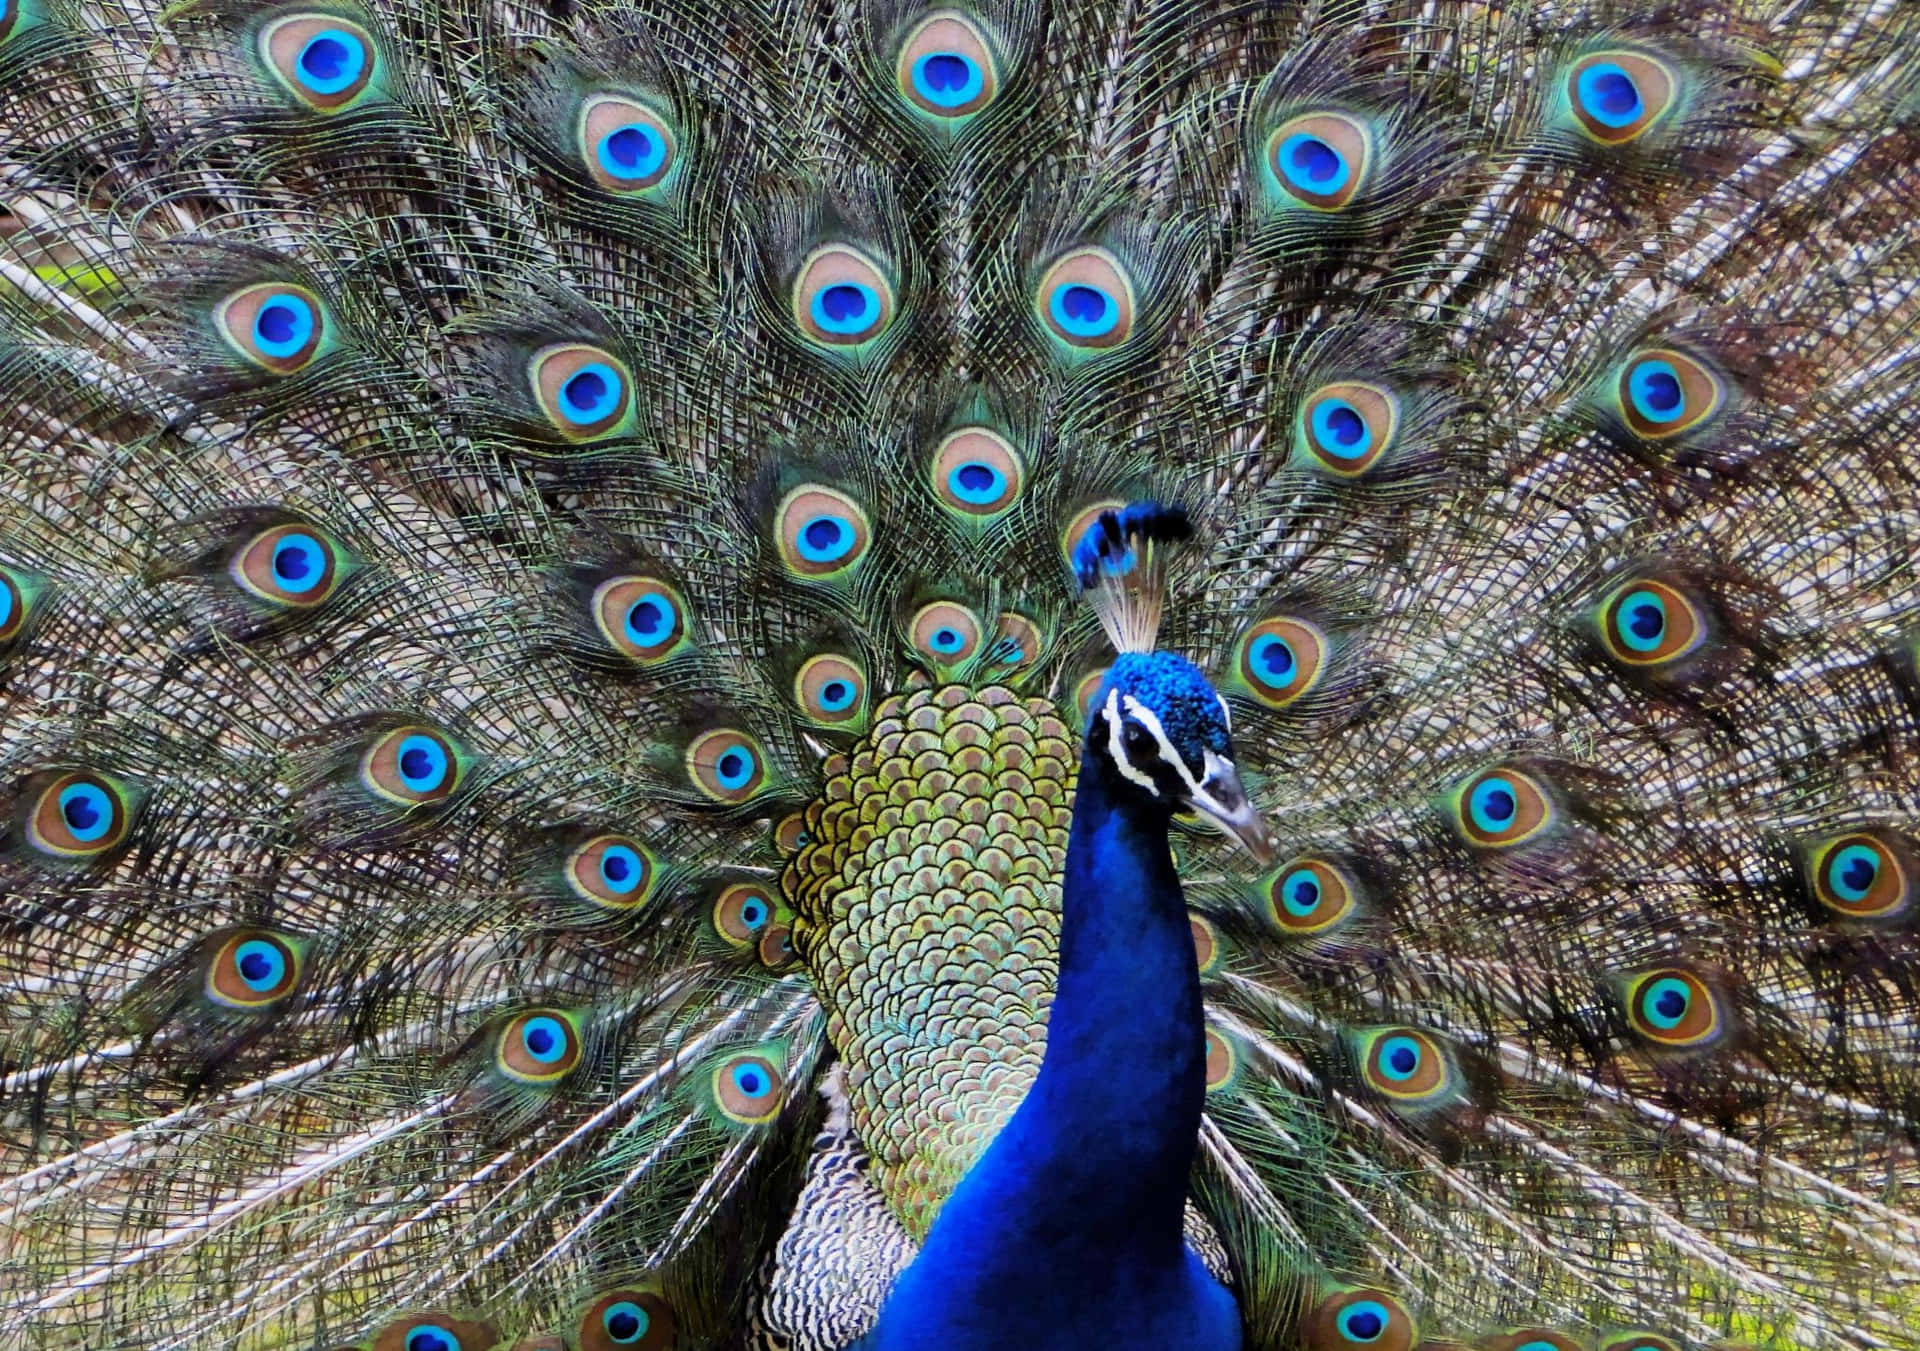 A Peacock With Its Feathers Spread Out